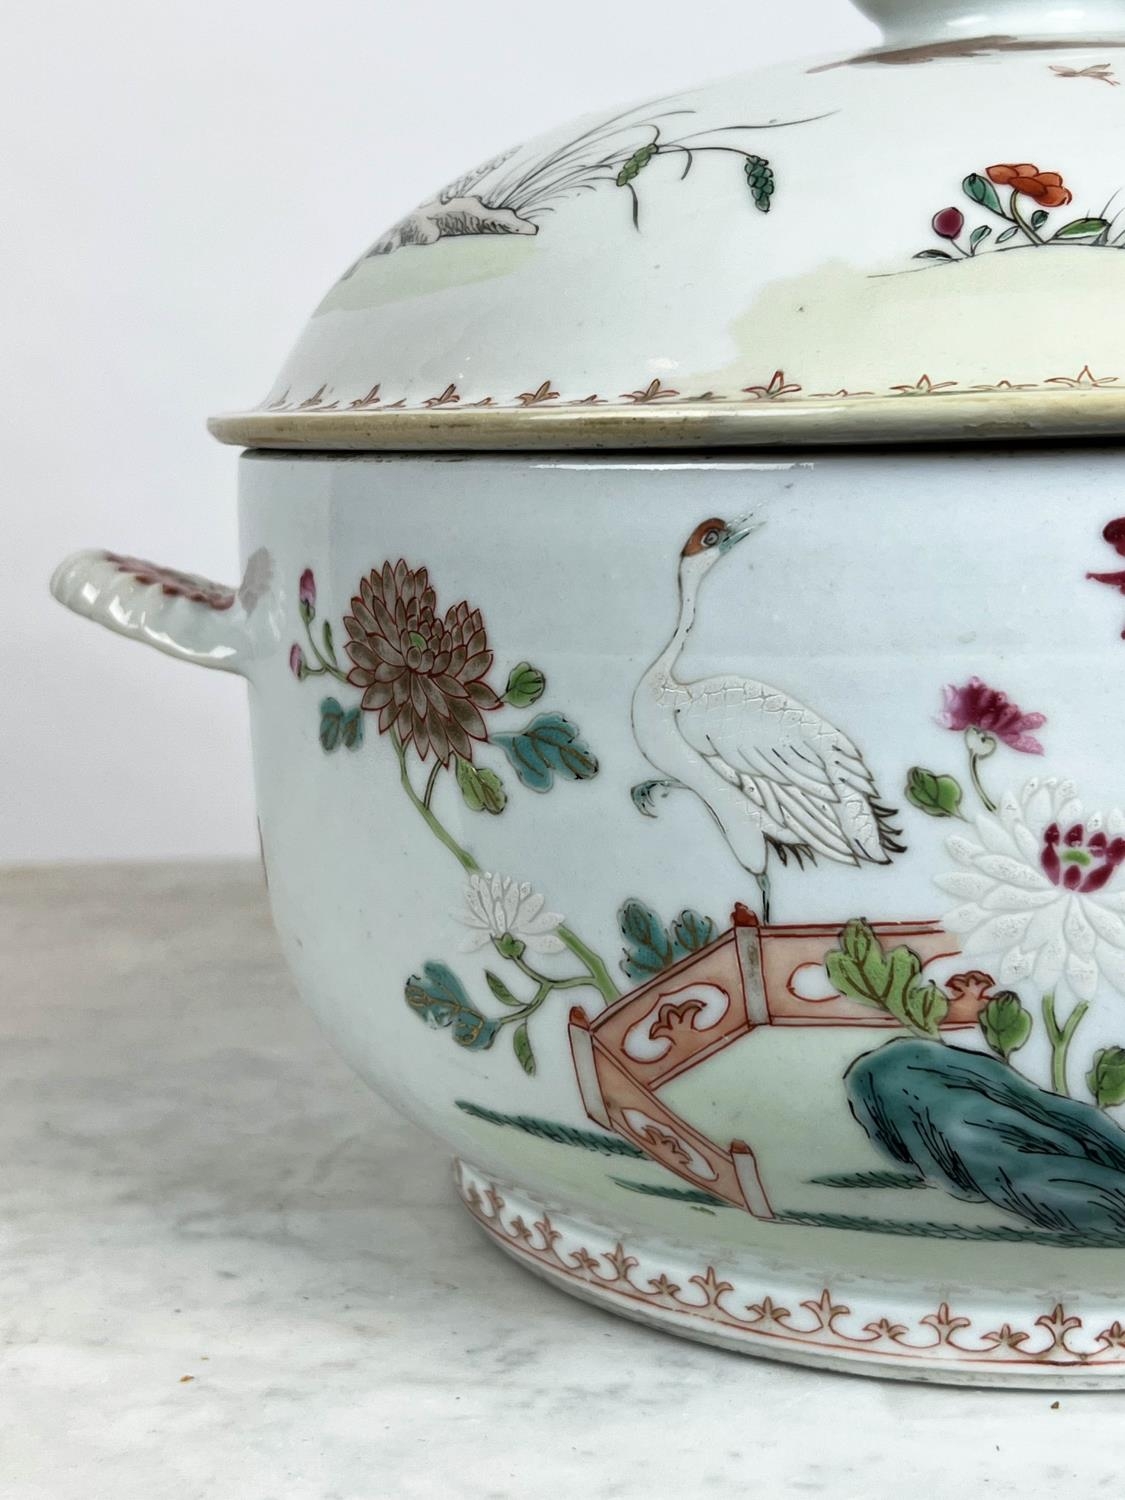 CHINESE EXPORT SOUP TUREEN, 19th century famille rose, decorated with cranes in garden scenes. - Image 4 of 9